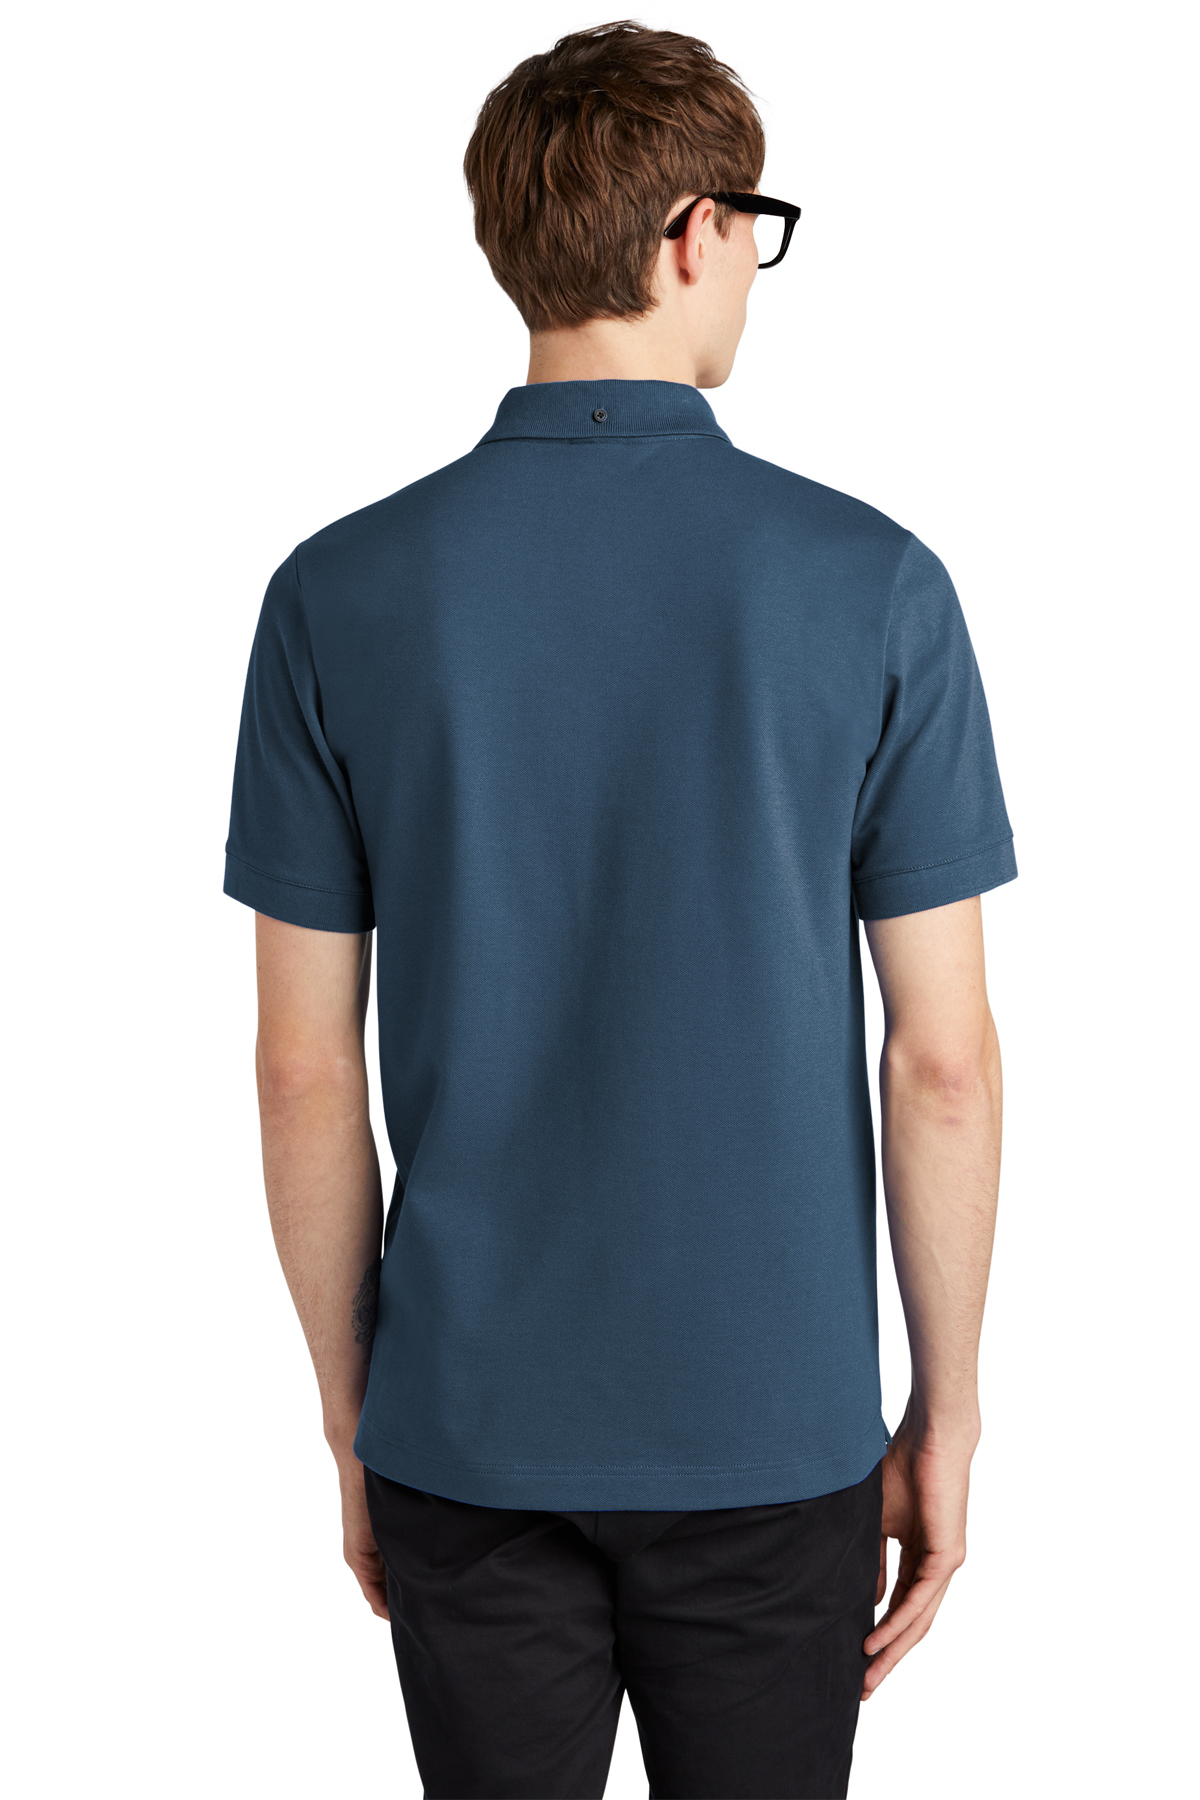 Mercer+Mettle Stretch Heavyweight Pique Polo | Product | SanMar